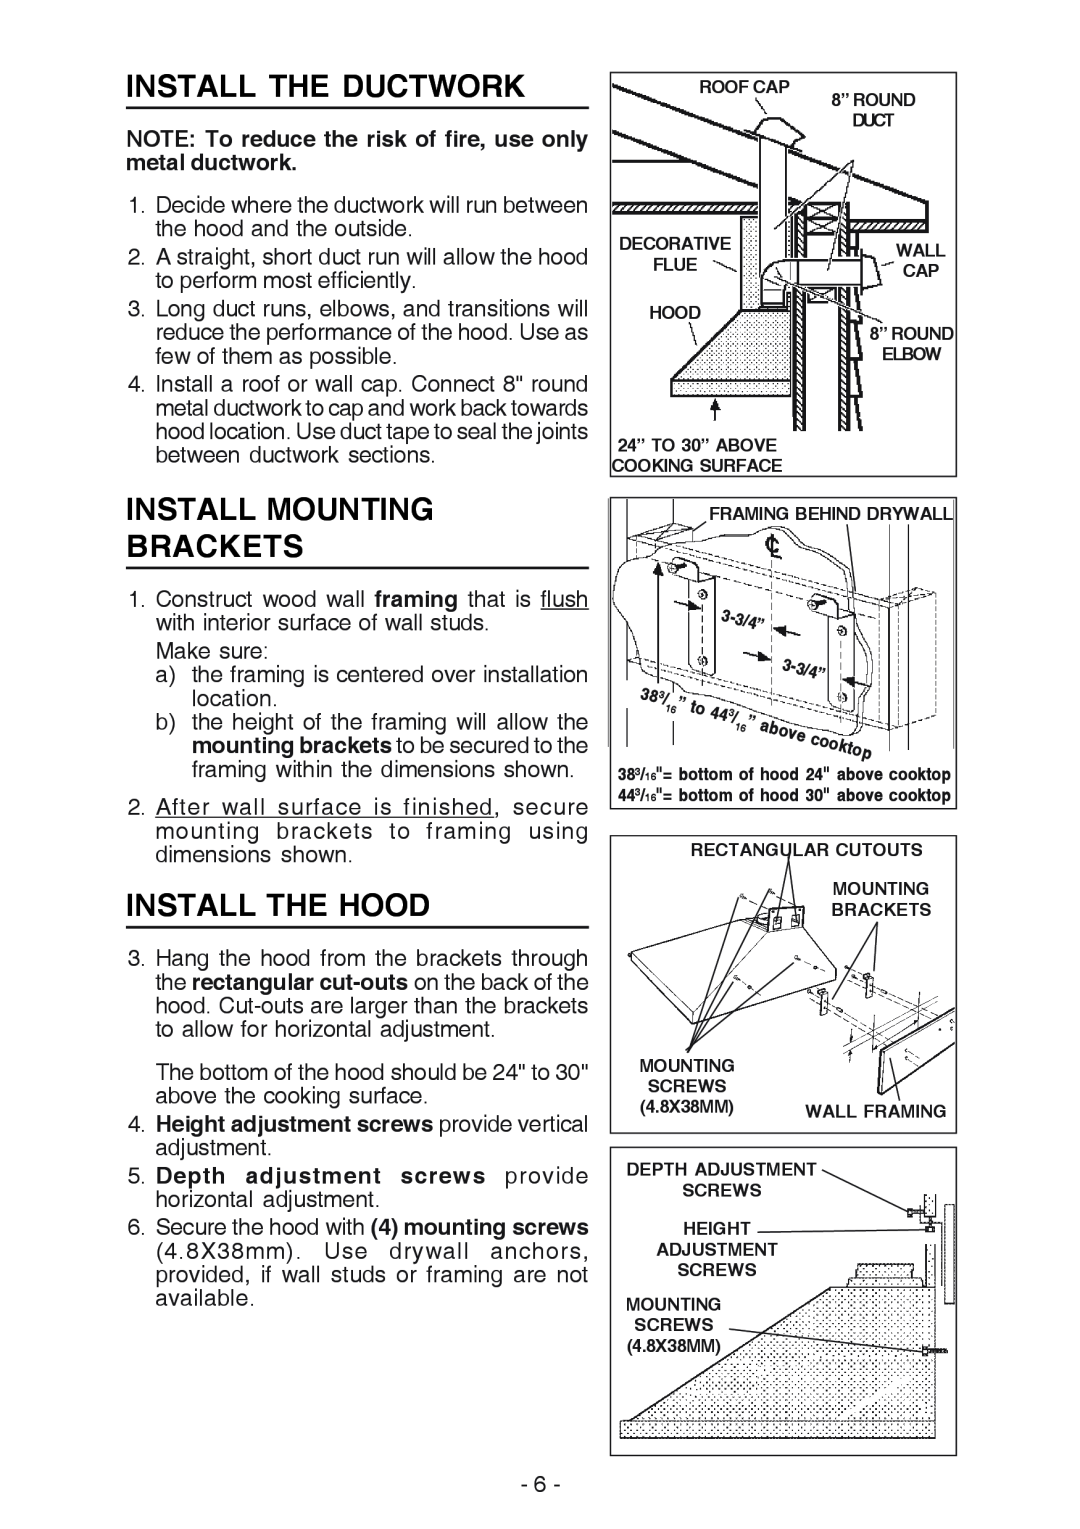 Best K42 manual Install The Ductwork, Install Mounting Brackets, Install The Hood 